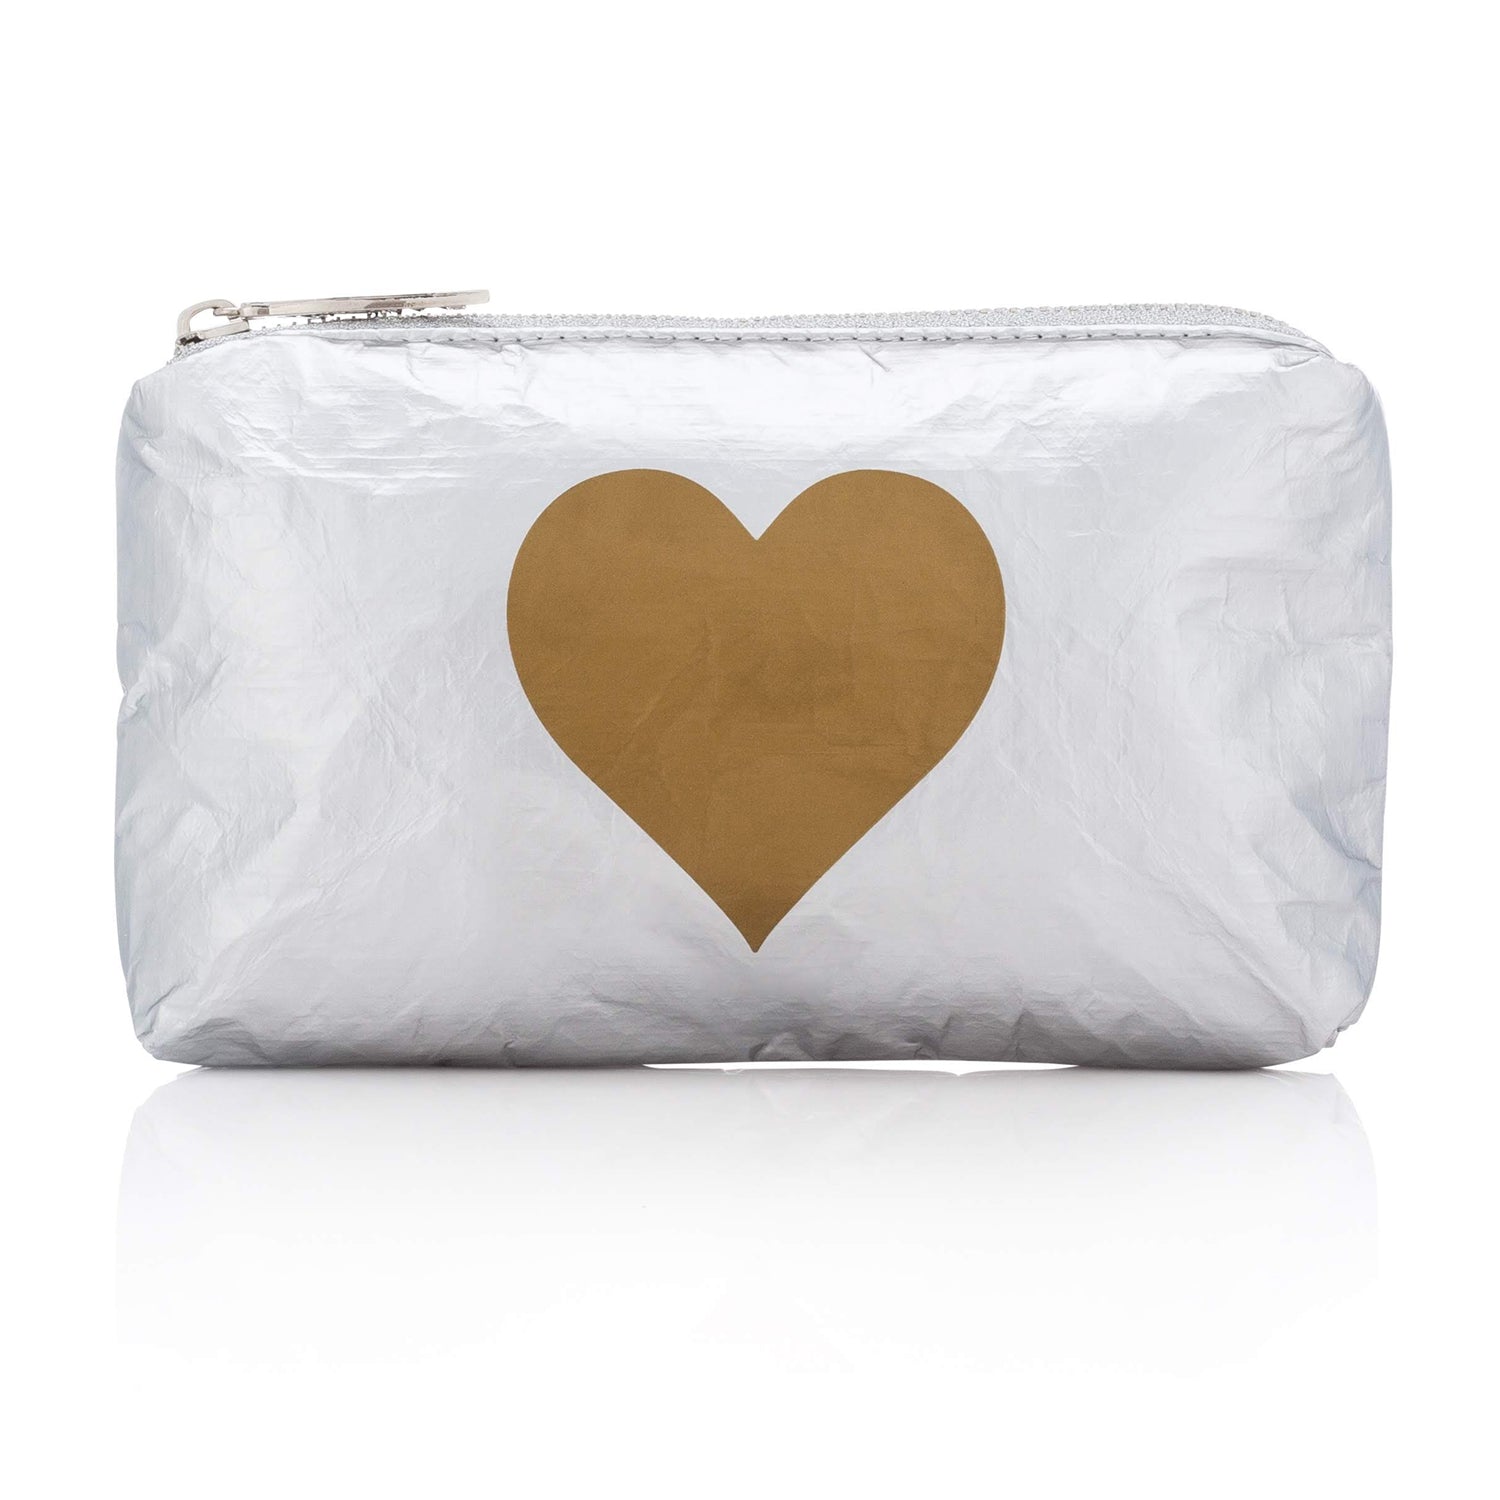 Cute Silver Clutch - Mini Padded Pack - Metallic Silver Collection with Gold Heart